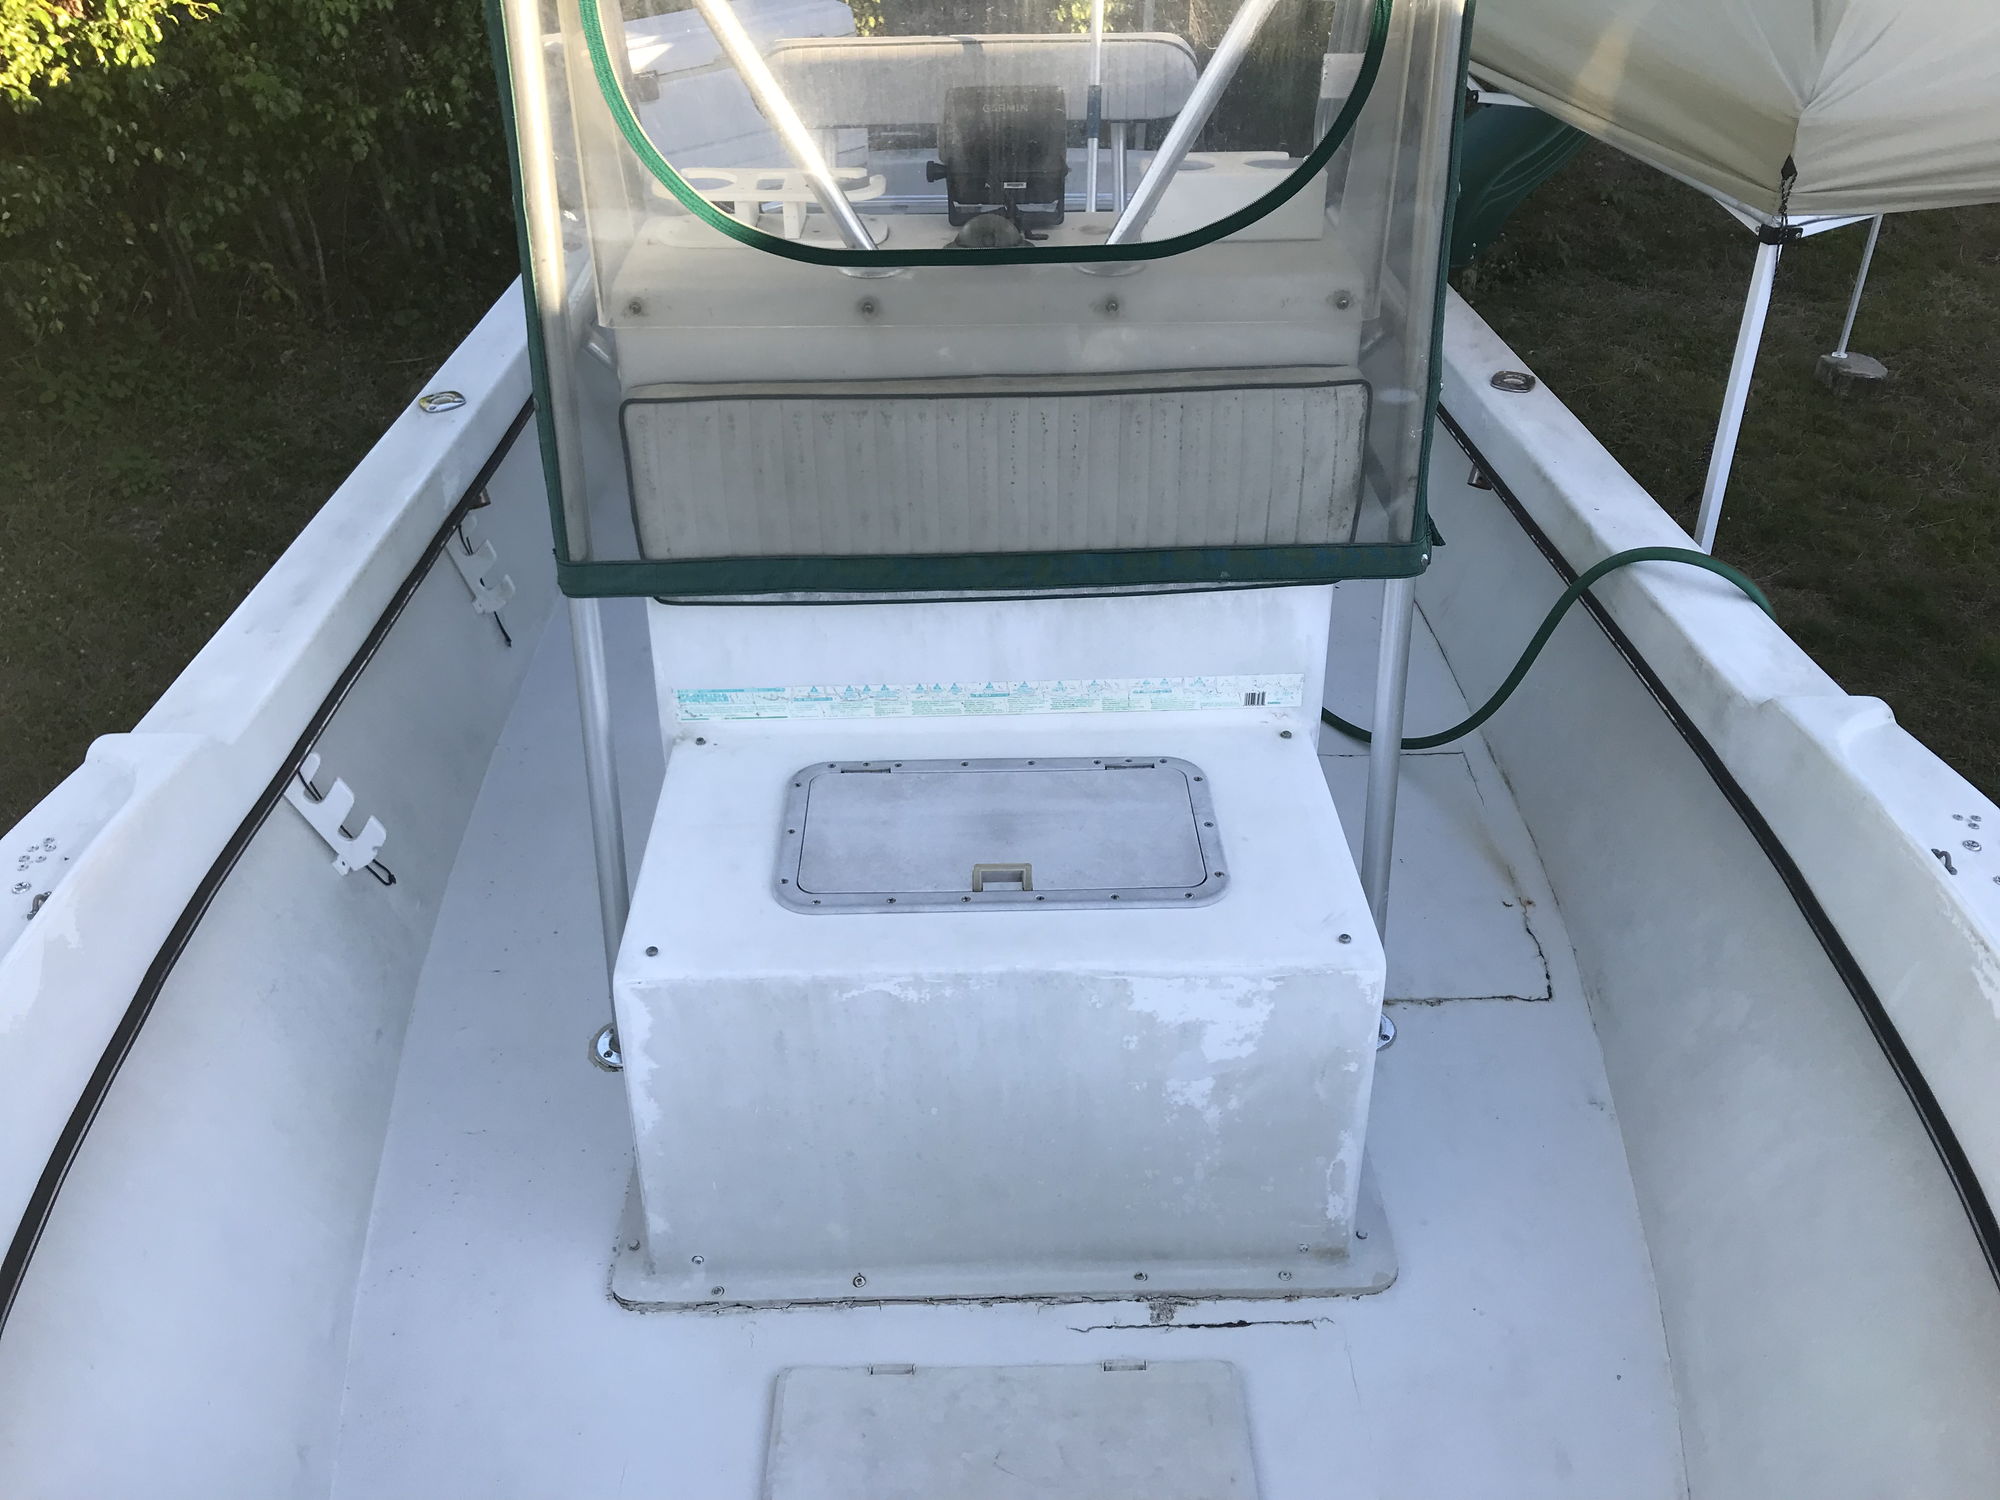 How much does it cost to build a fiberglass boat Best Way To Fix Soft Spot On Floor The Hull Truth Boating And Fishing Forum